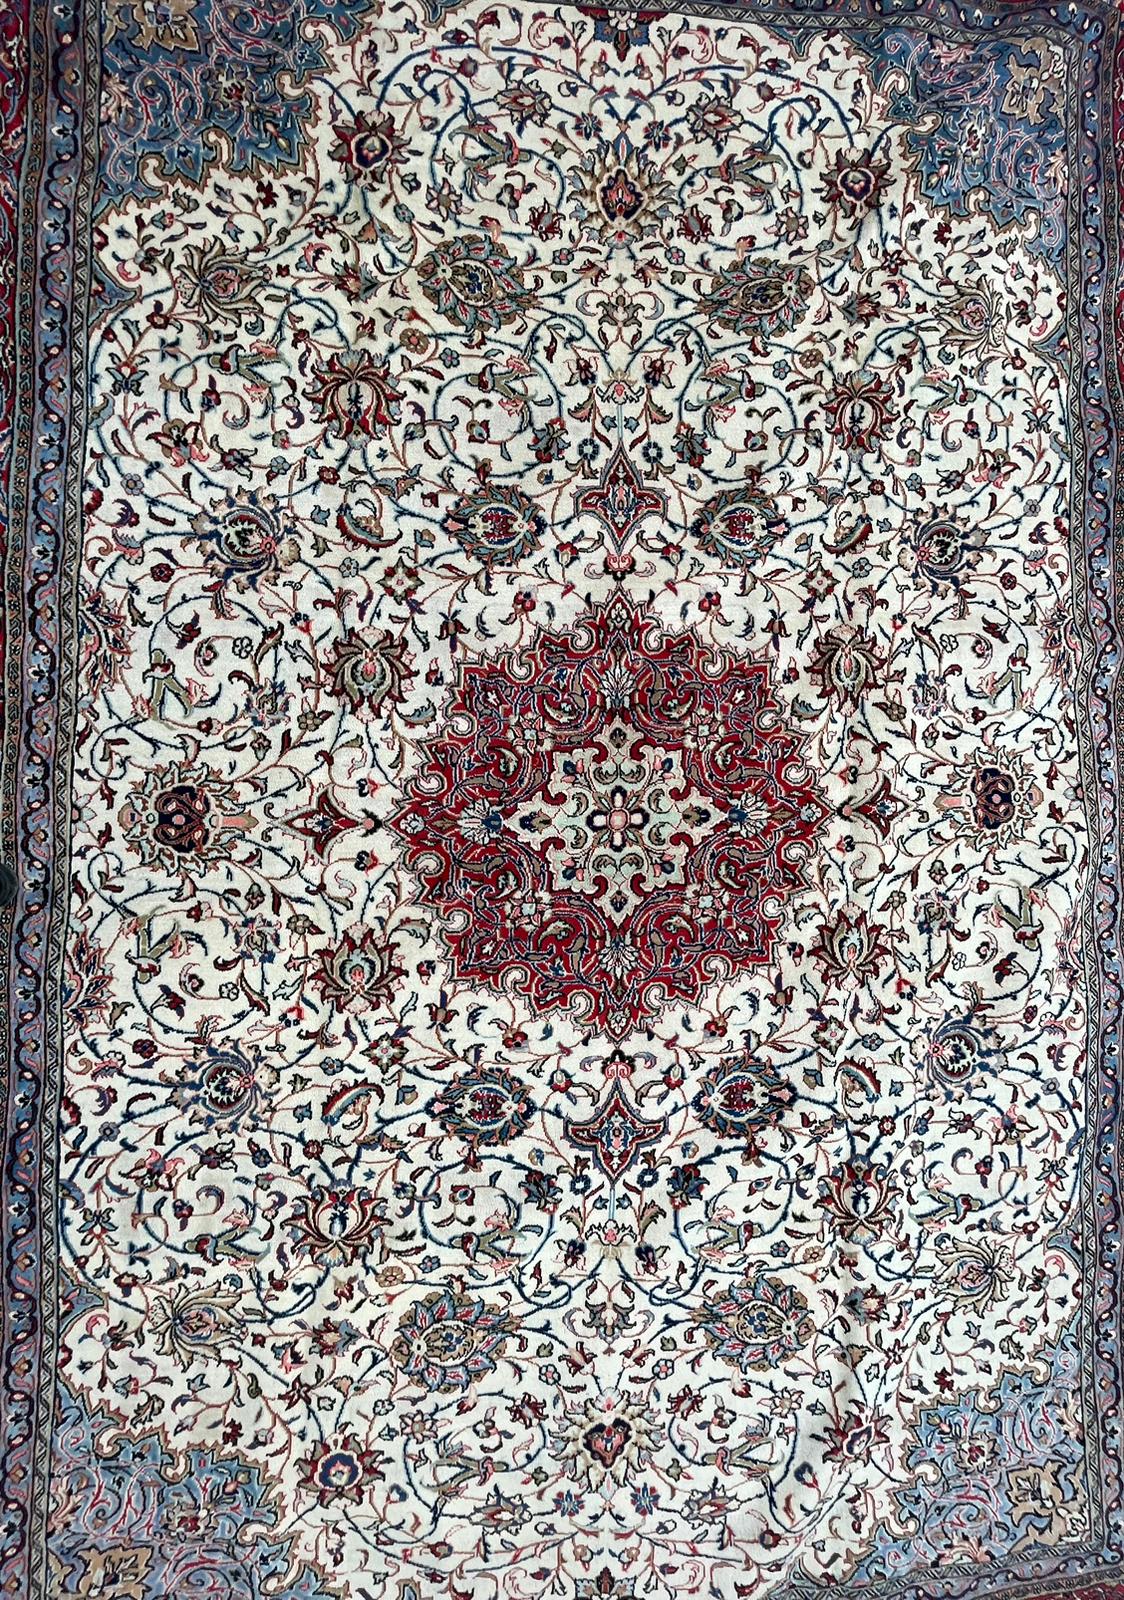 EARLY 20TH CENTURY NORTH WEST PERSIAN SAROUK FLOOR CARPET - Image 5 of 5